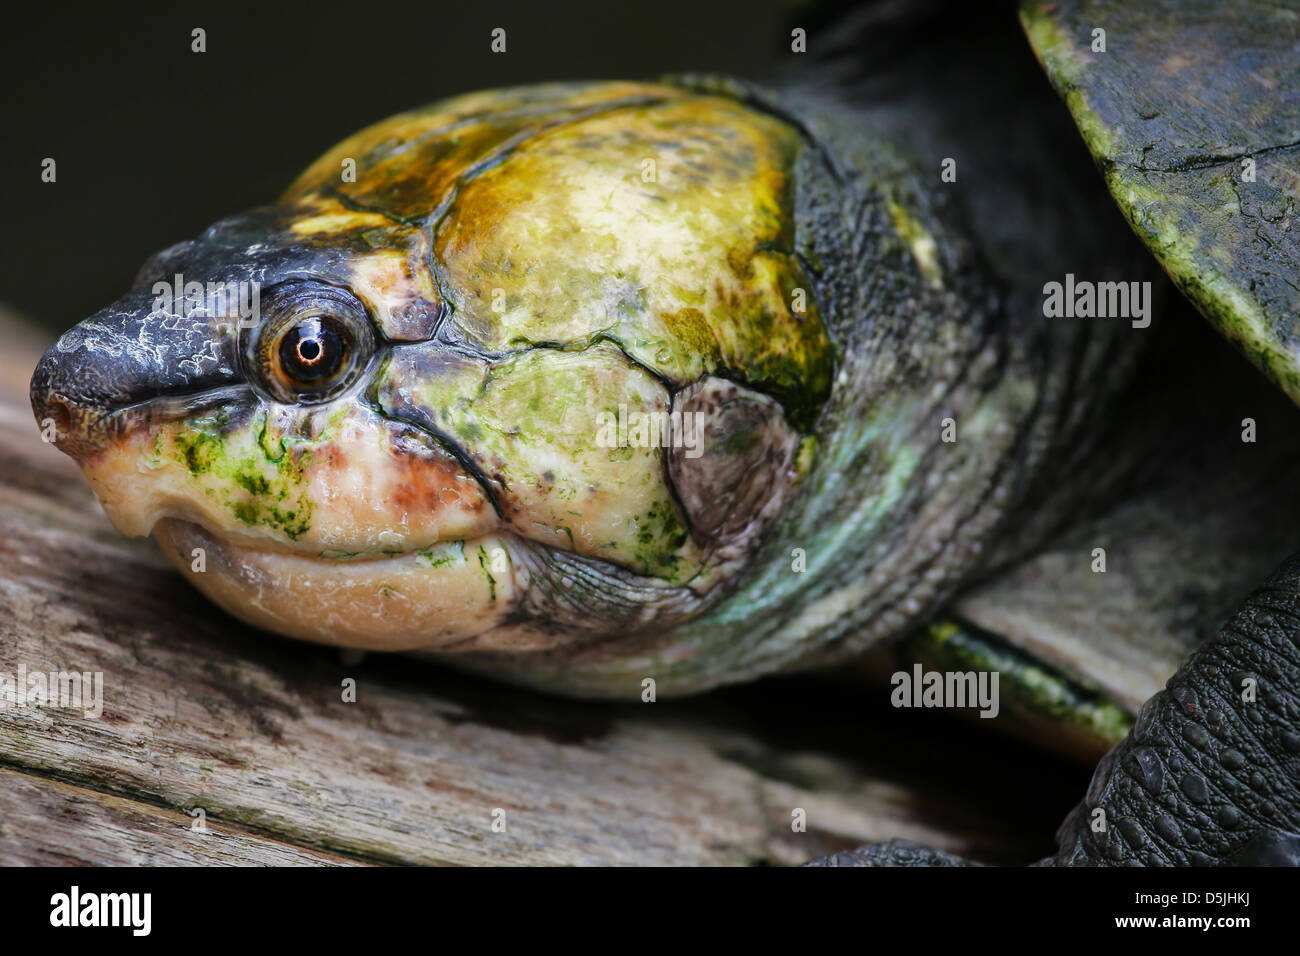 Critically ENDANGERED Madagascan Big-headed Turtle (Erymnochelys madagascariensis) floating and basking on a log in the wild. Stock Photo